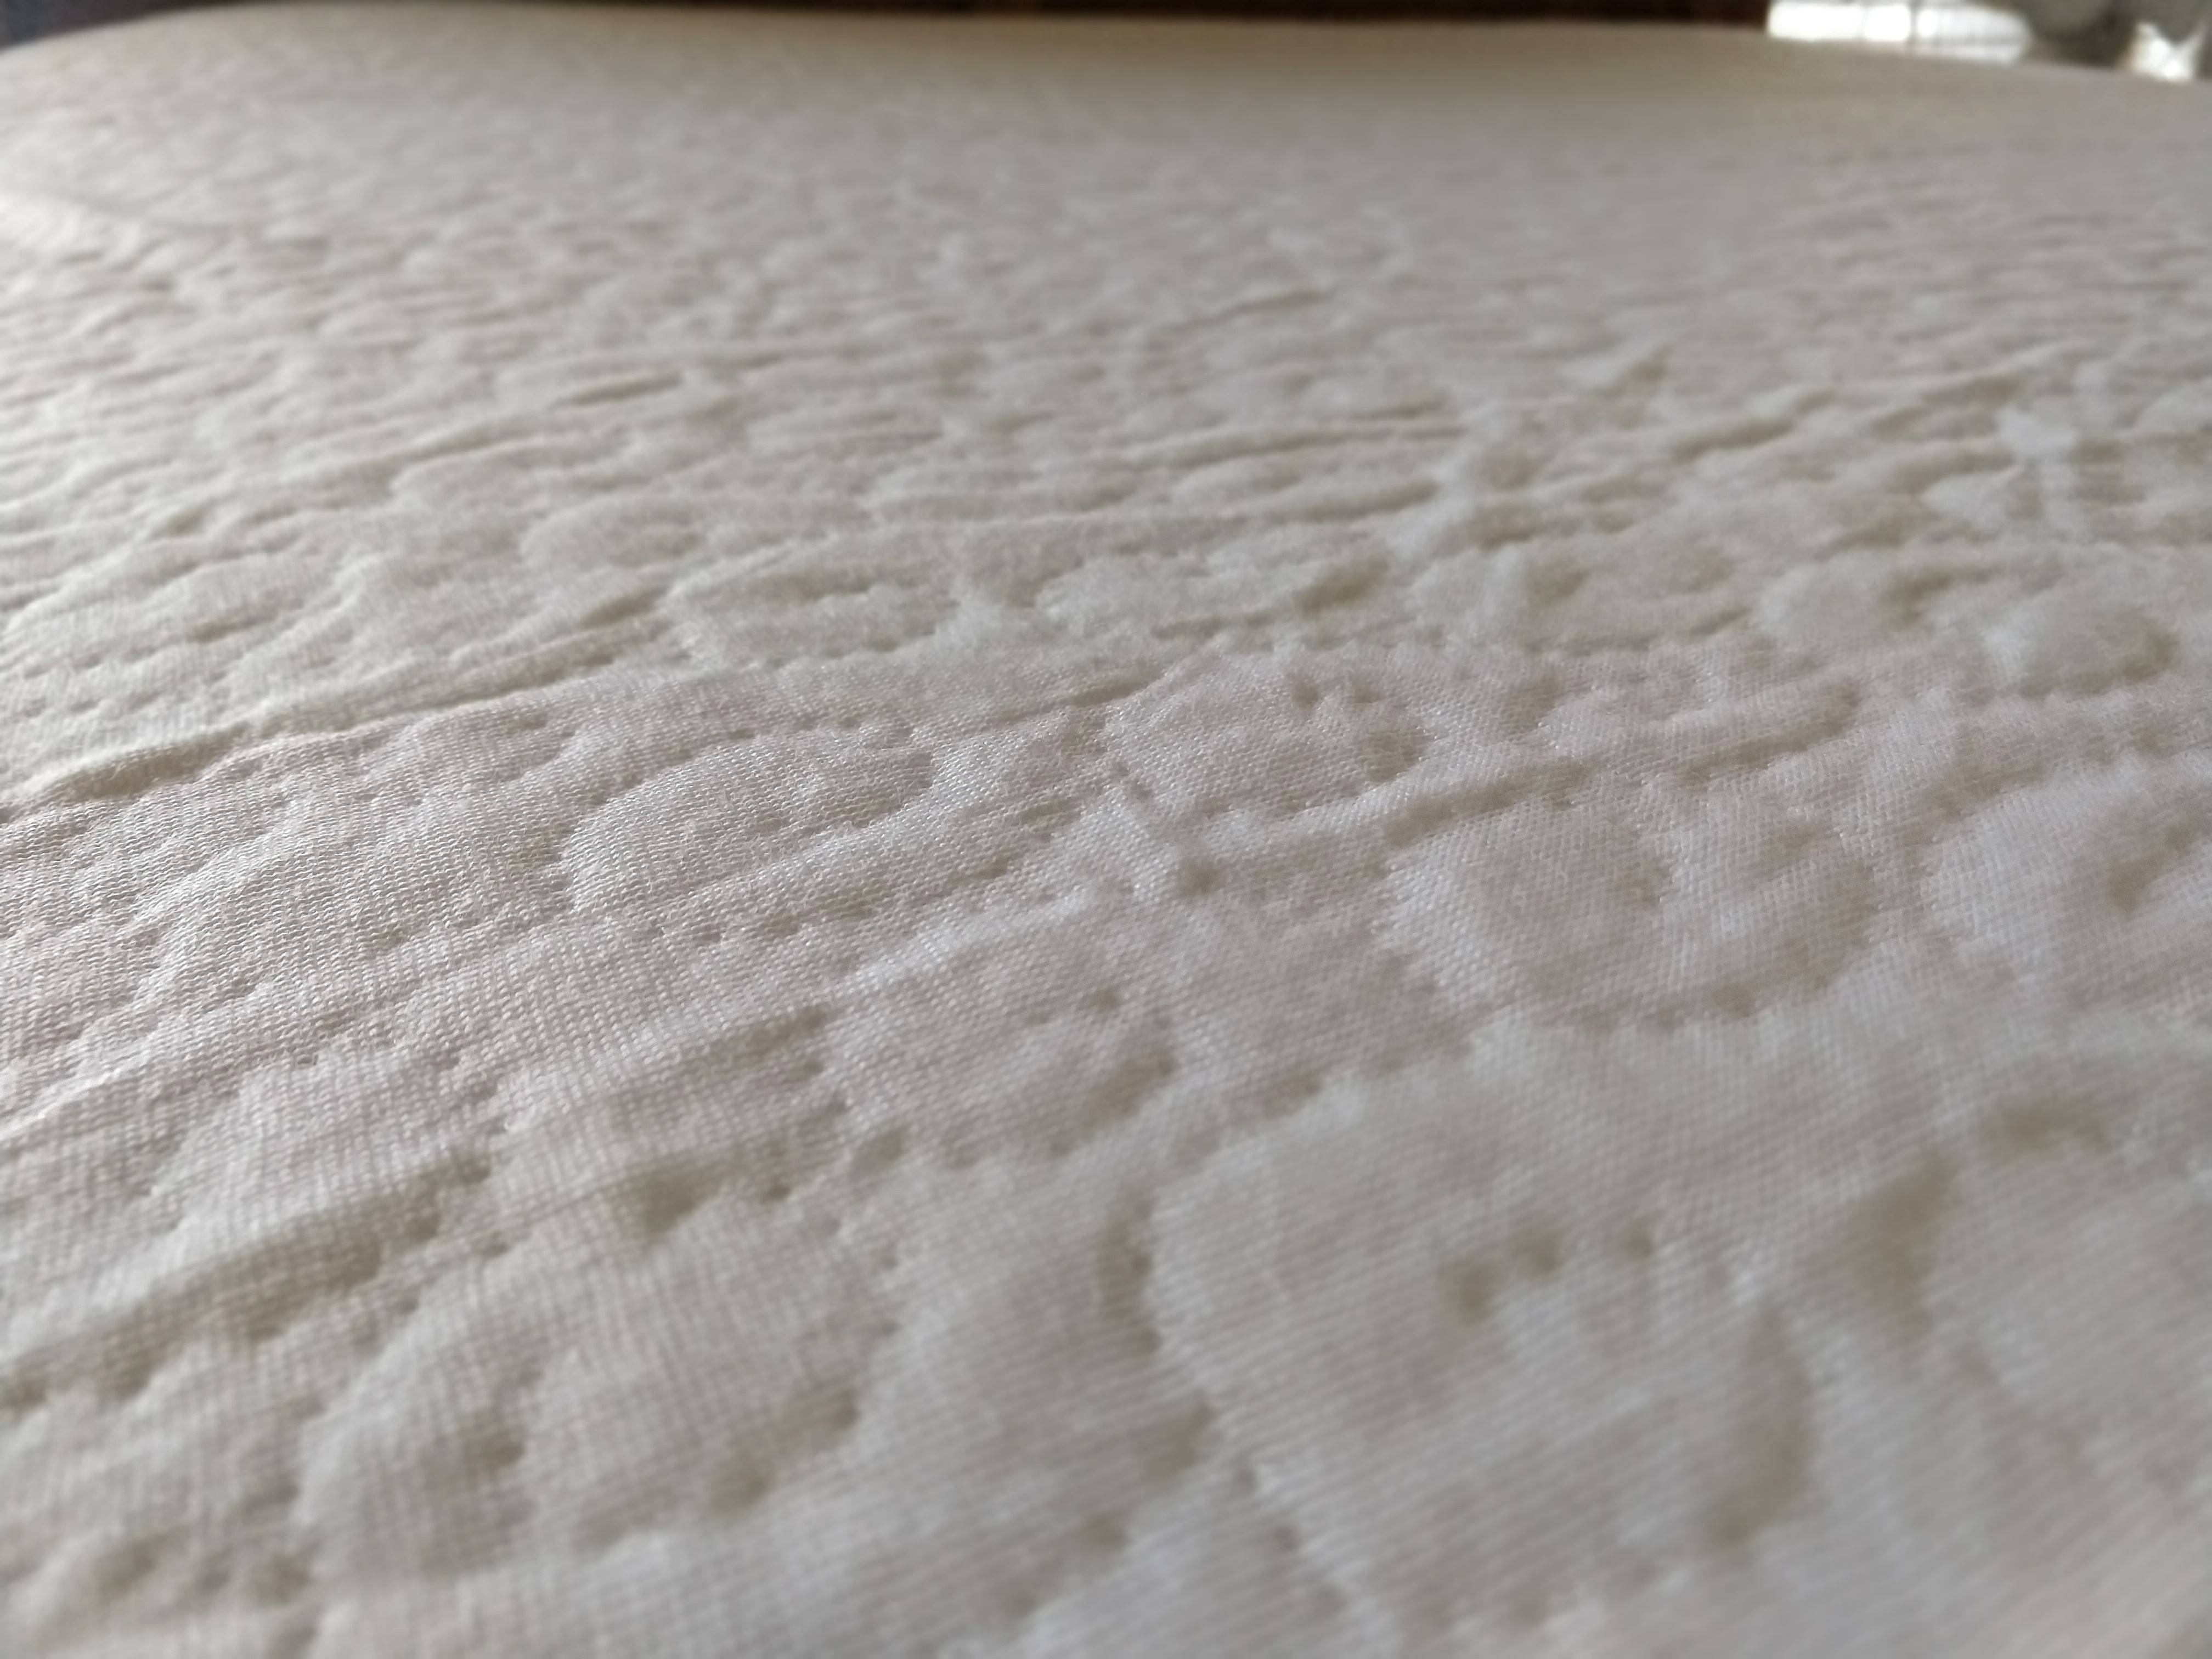 GhostBed Mattress Protector Review